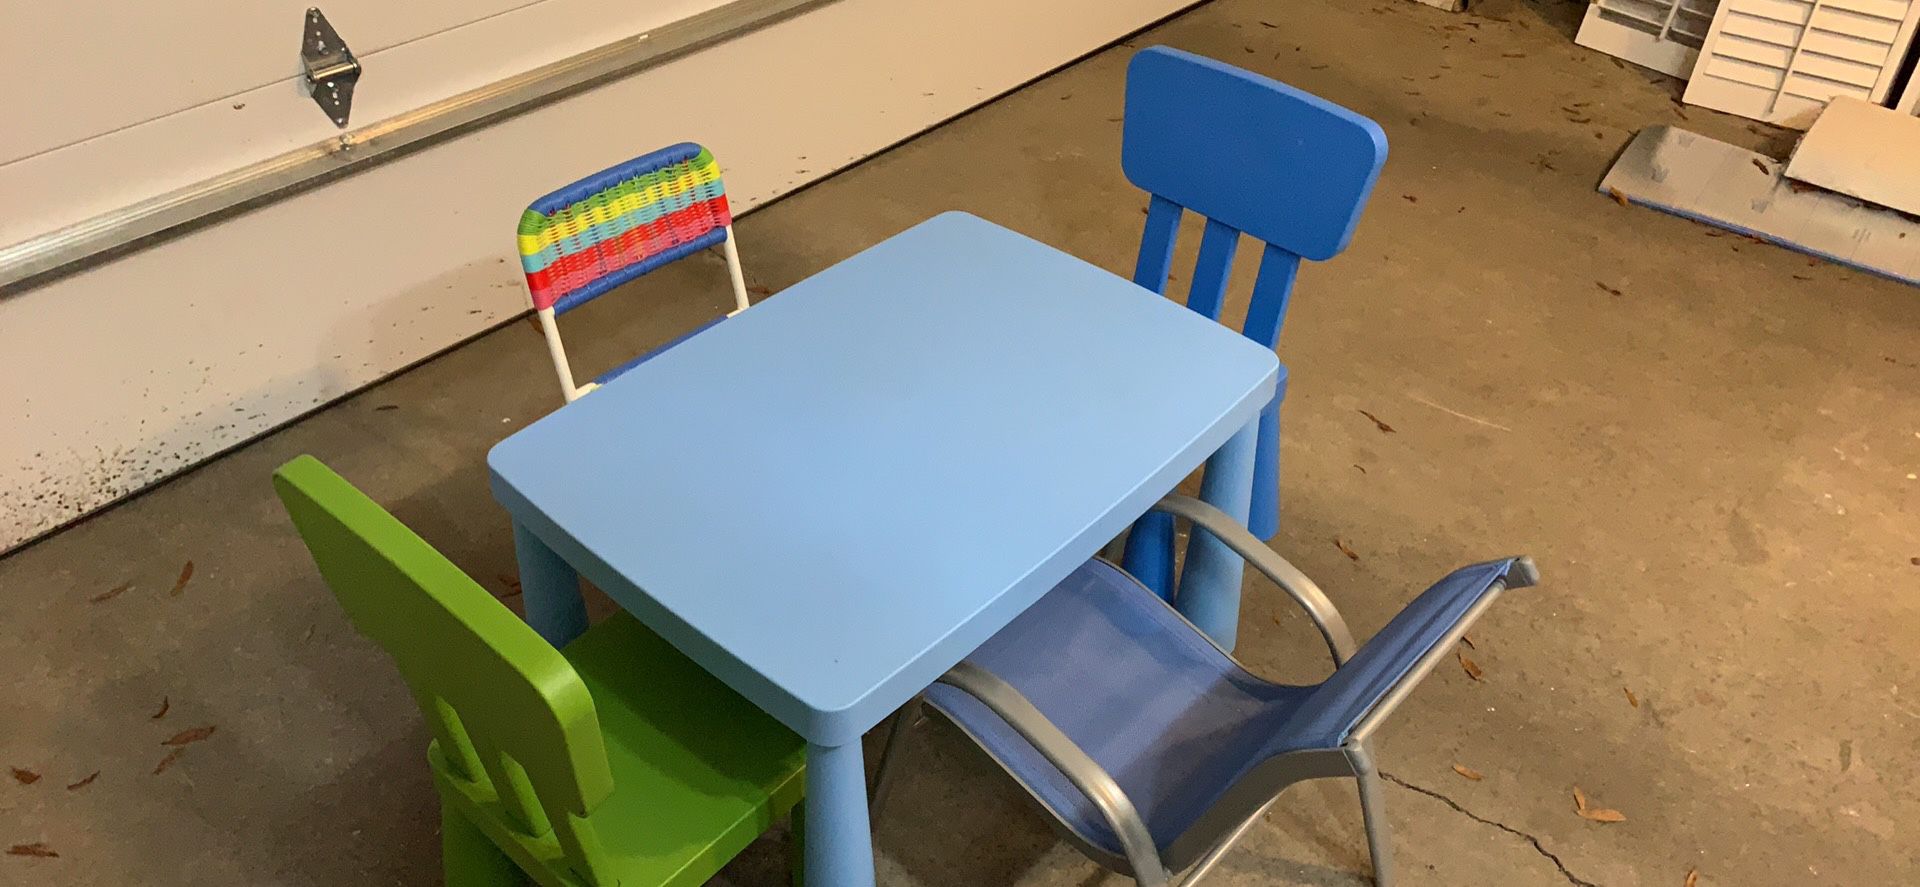 IKEA Mammut table and 2 chairs for kids. Perfect for activity table and parties. 2 additional chairs are for free.